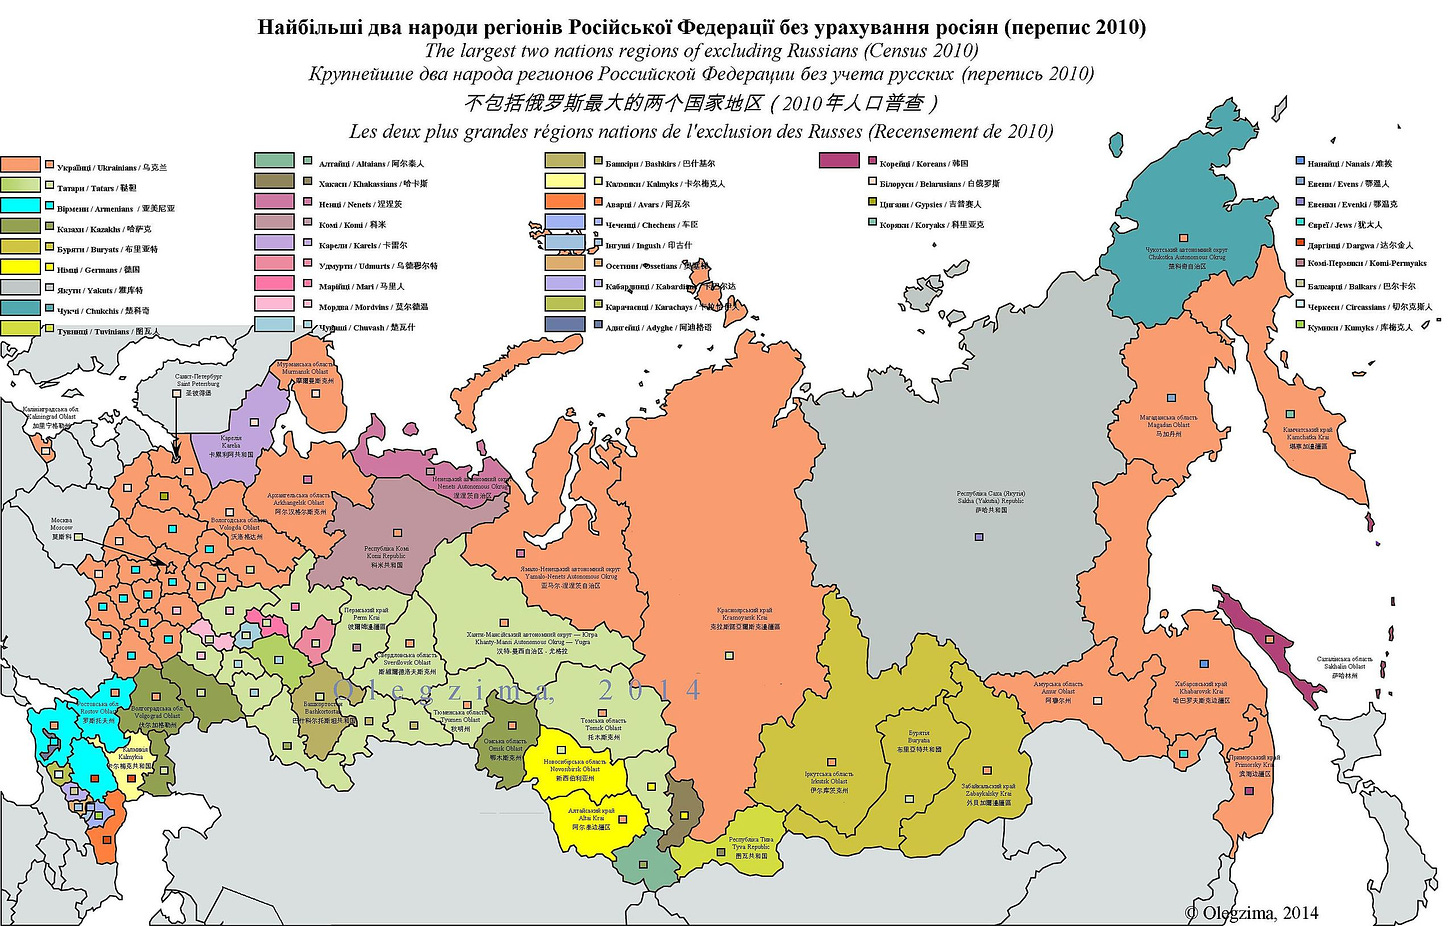 The largest two ethnic groups, excluding Russians, in each region (Census 2010)